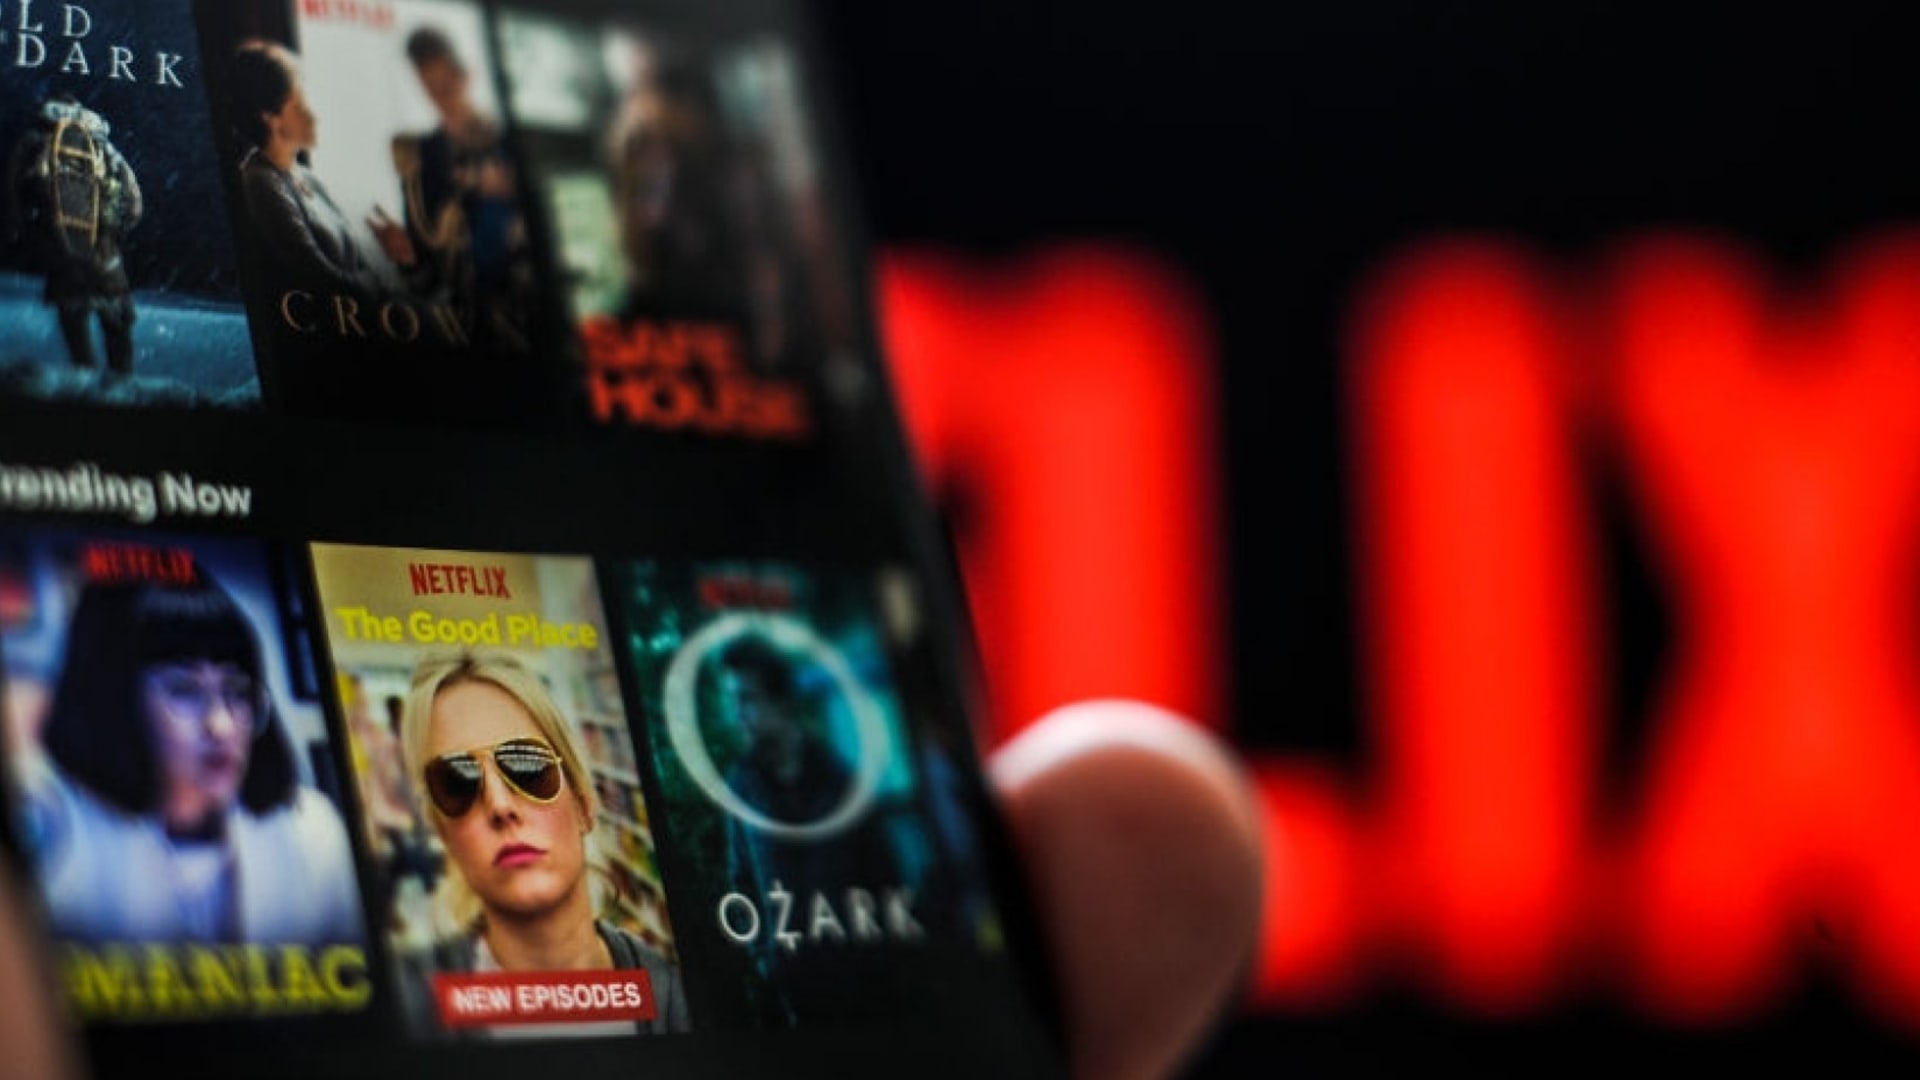 With This Brilliant New Feature, Netflix May Have Just Solved the Biggest Problem With Streaming Video